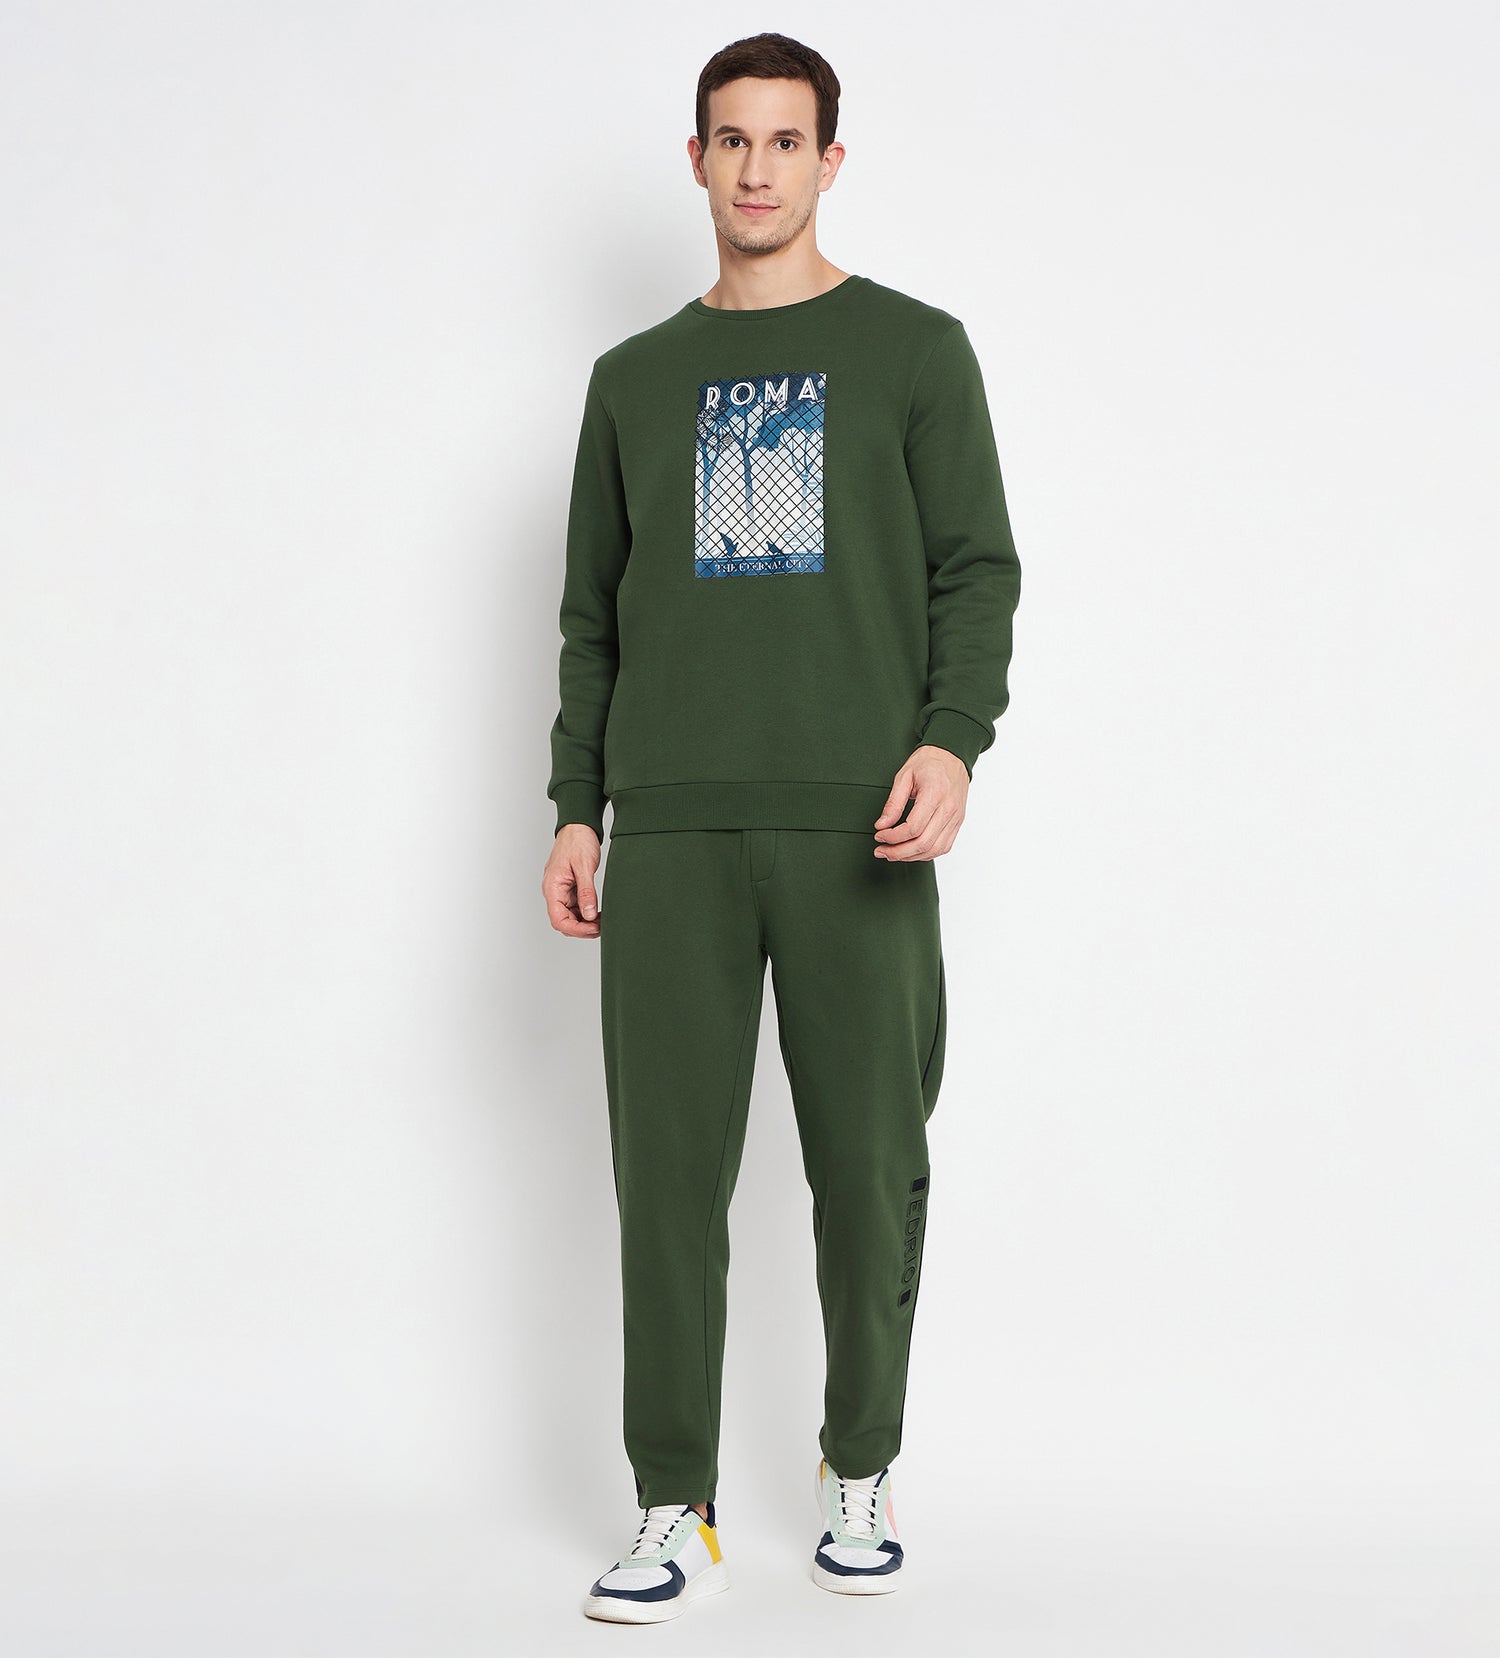 Rome-Inspired Olive Tracksuit with Digital &amp; Emboss Detailing